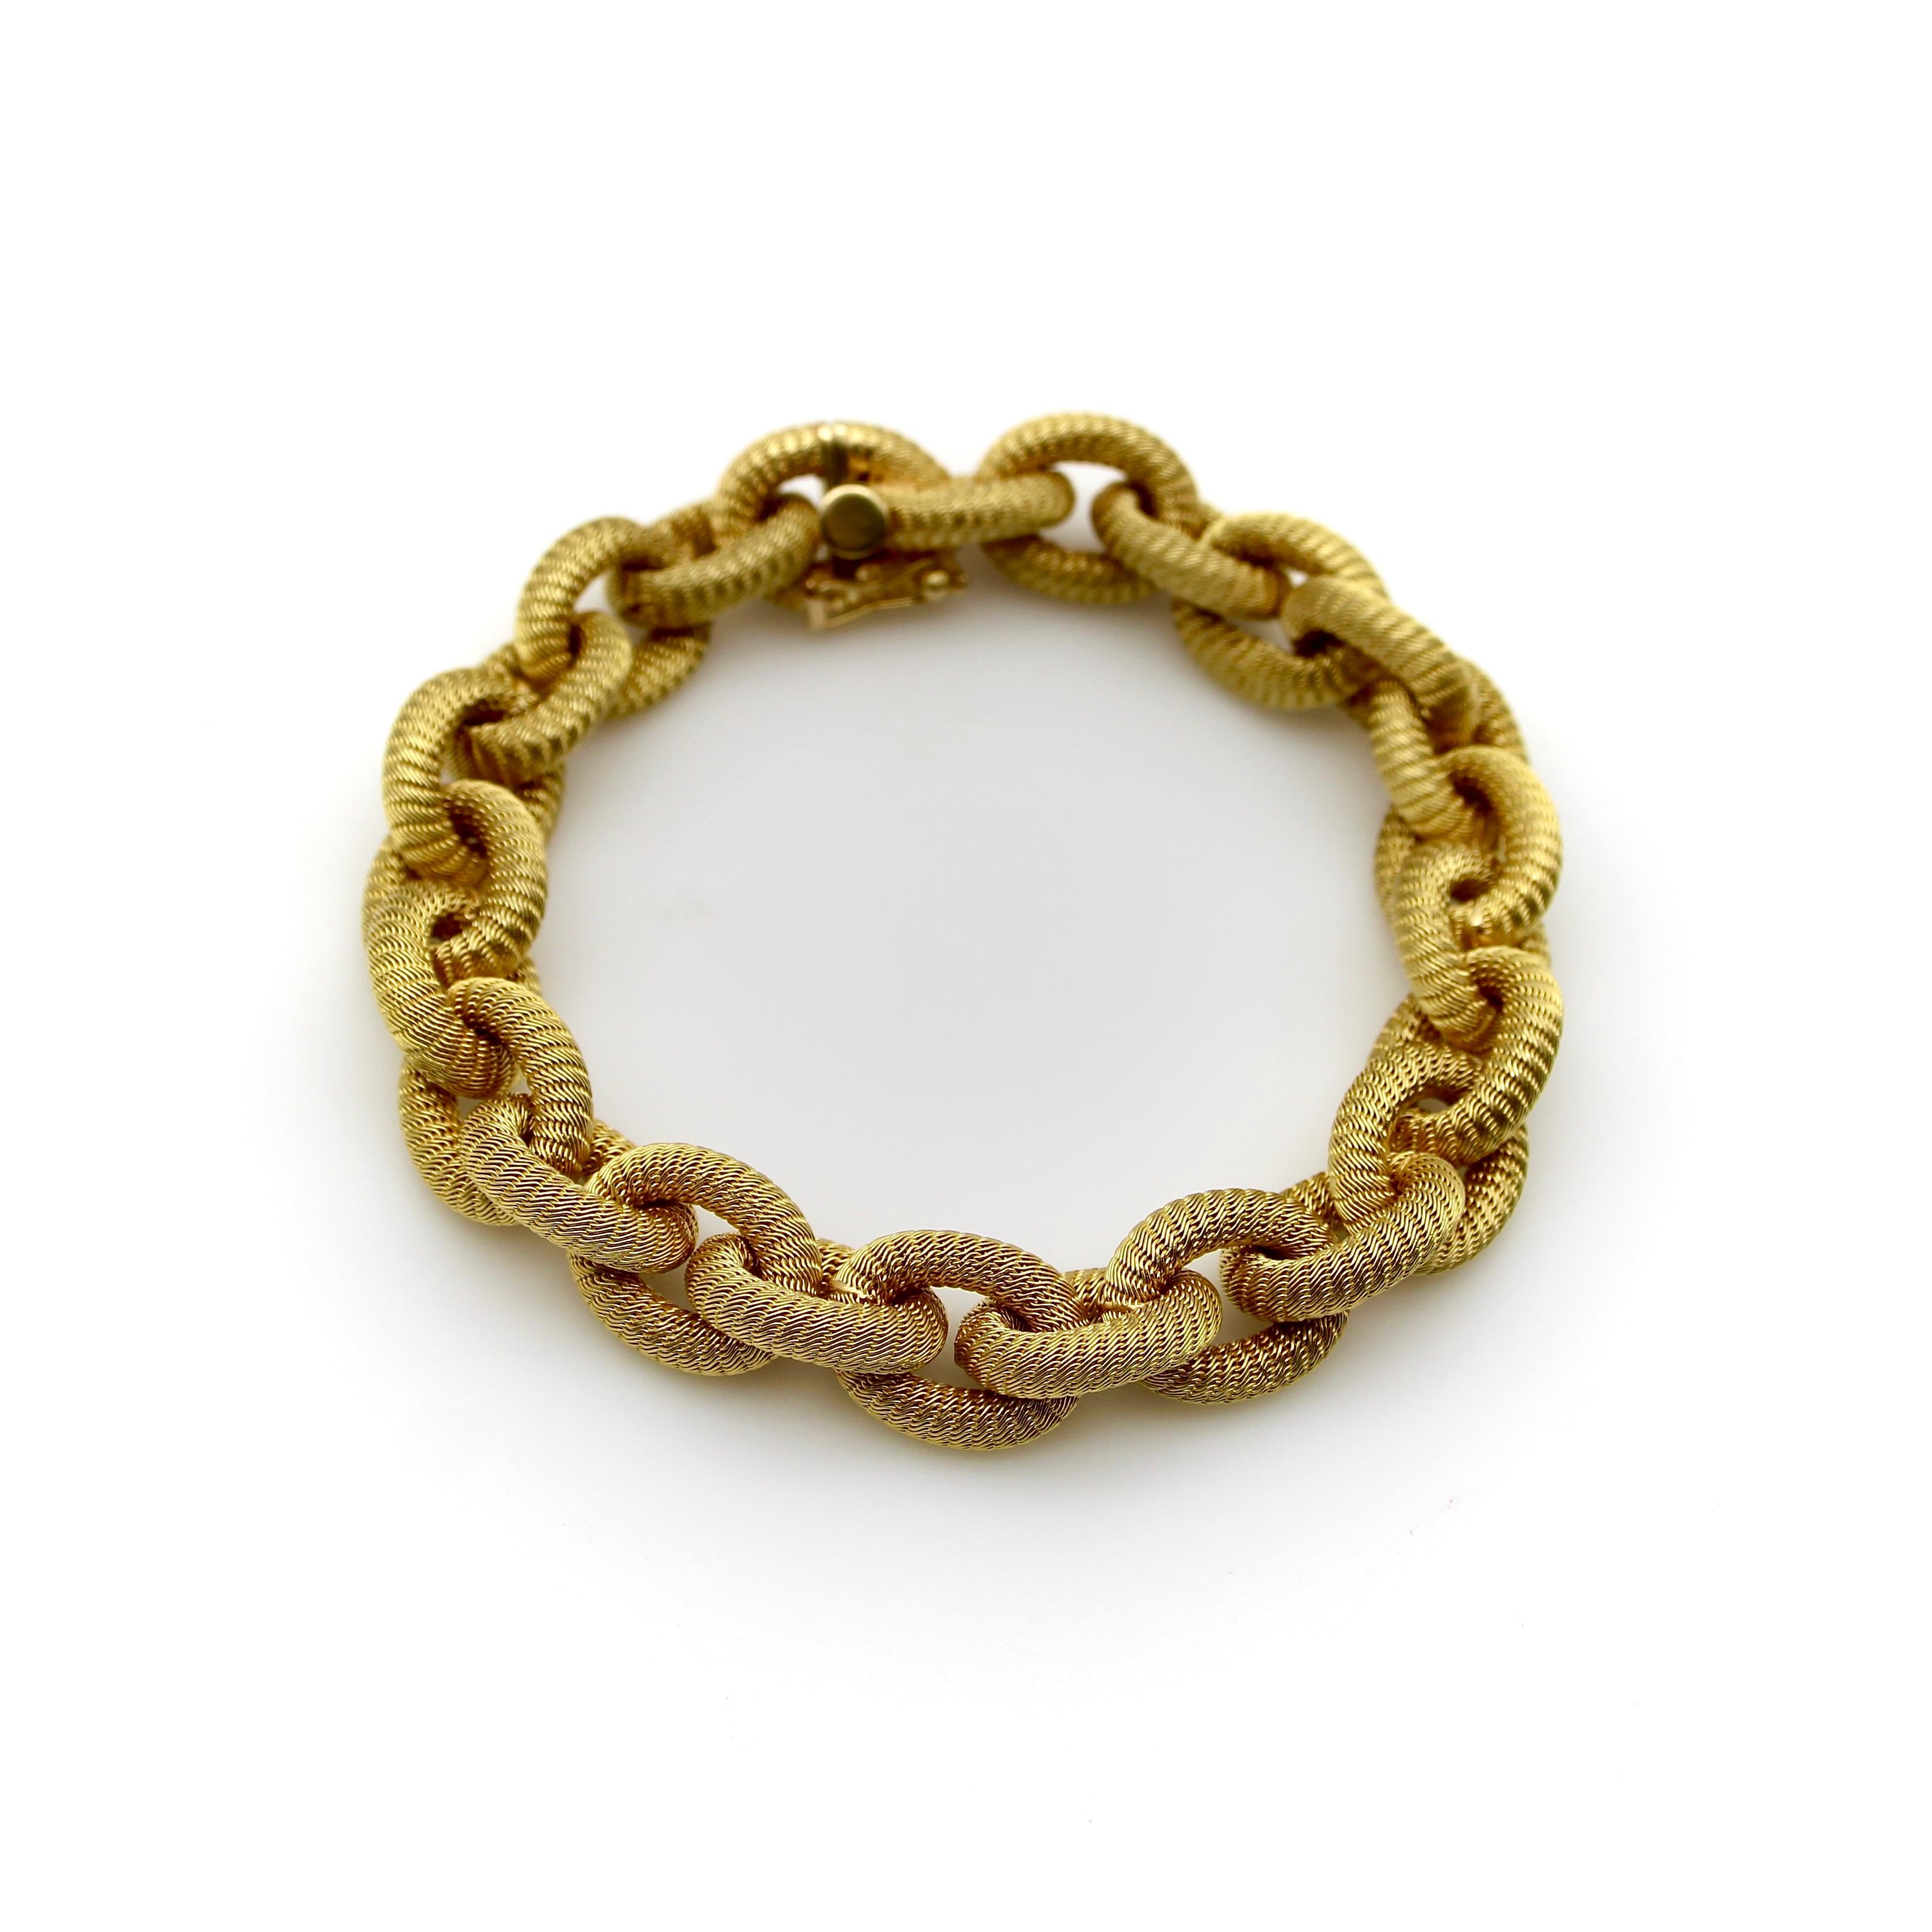 Indicative of a classic French woven bracelet, this stunning piece is extremely well-crafted. Its hand-woven oval links are meticulously detailed, each painstakingly looped to create an intricate, delicate effect that shimmers like matte gold. The